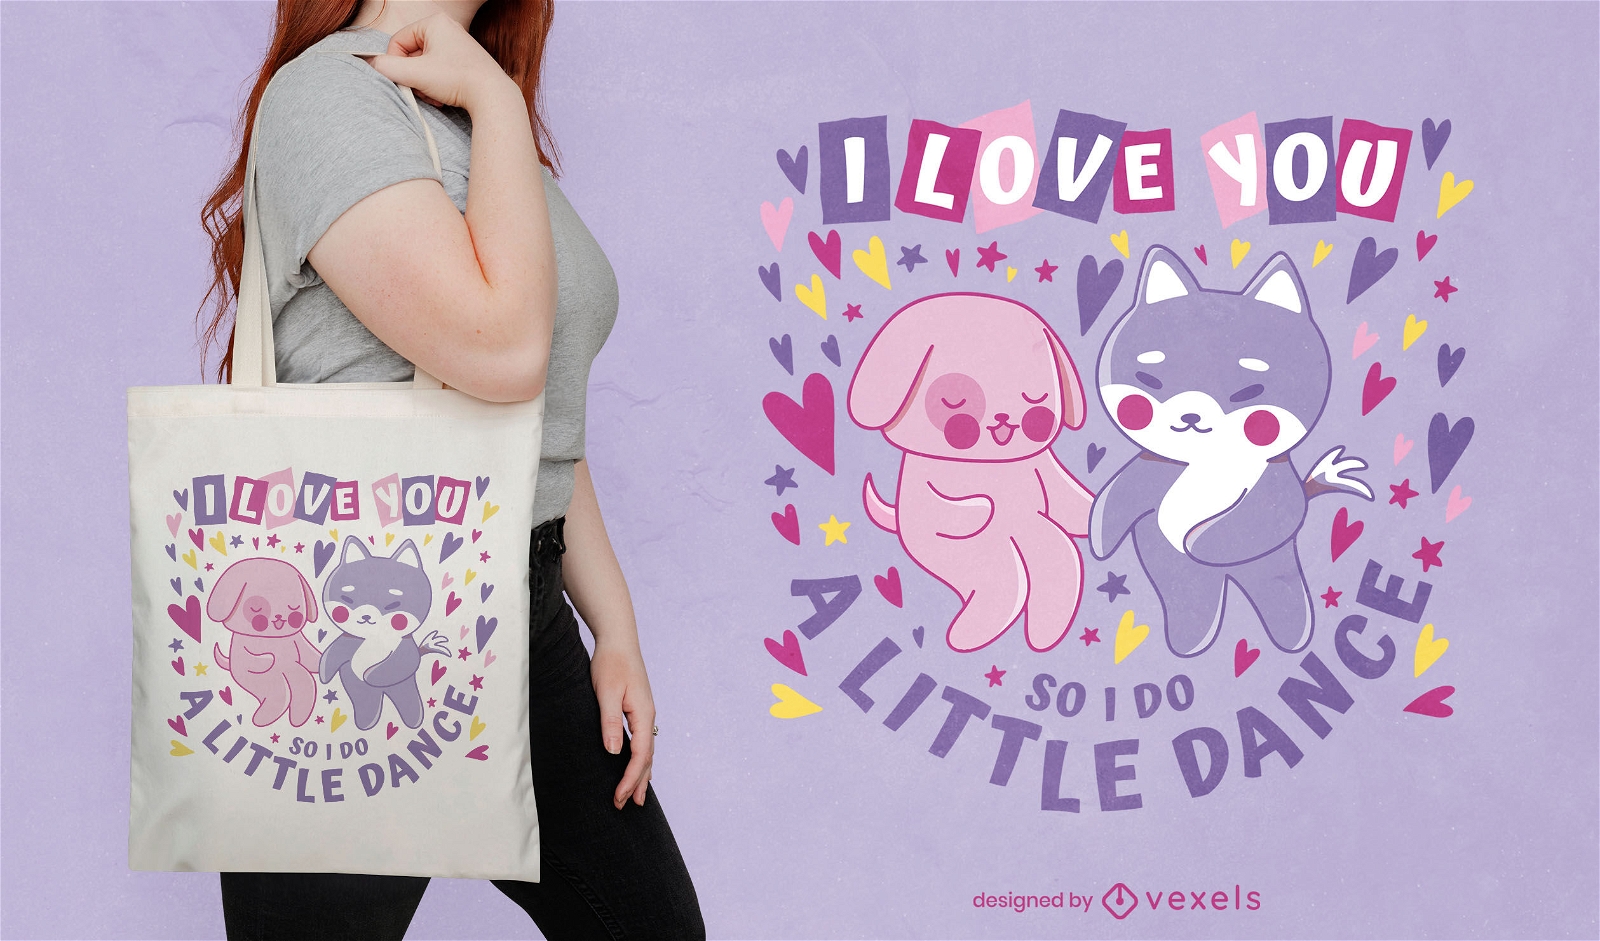 Dogs dancing valentines day tote bag design